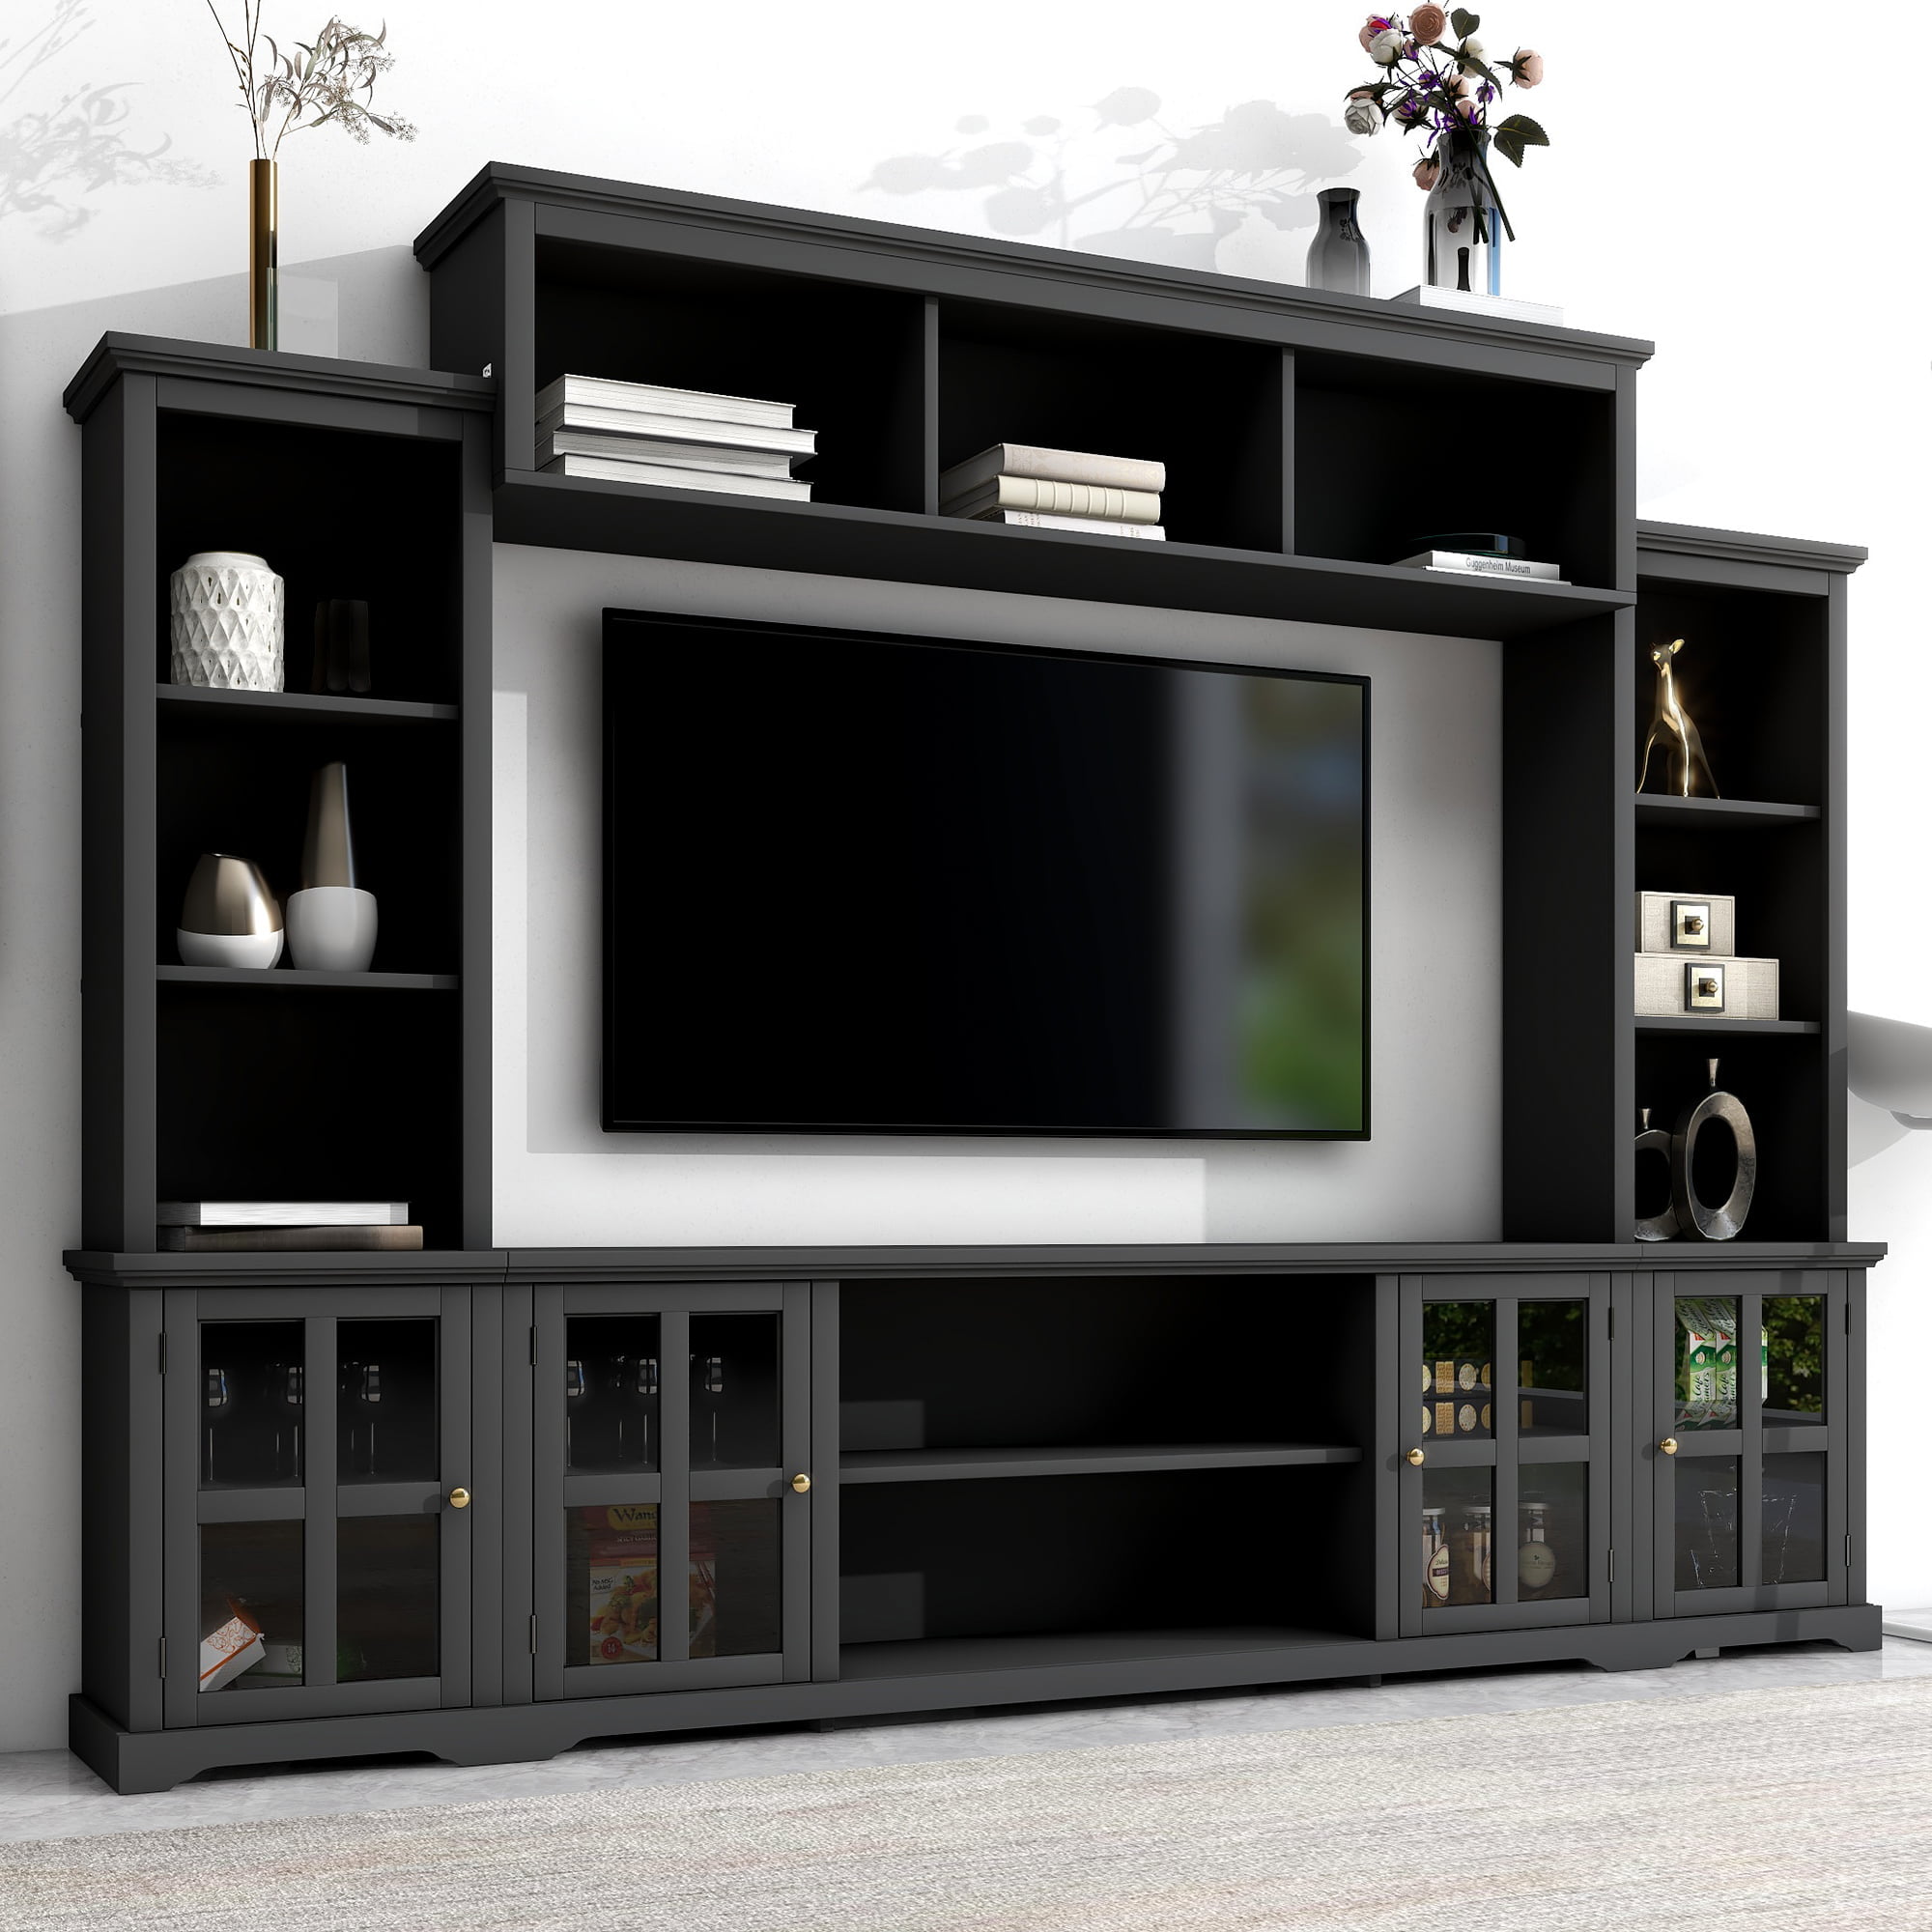 Minimalism Style Entertainment Wall Unit - SD000018AAB